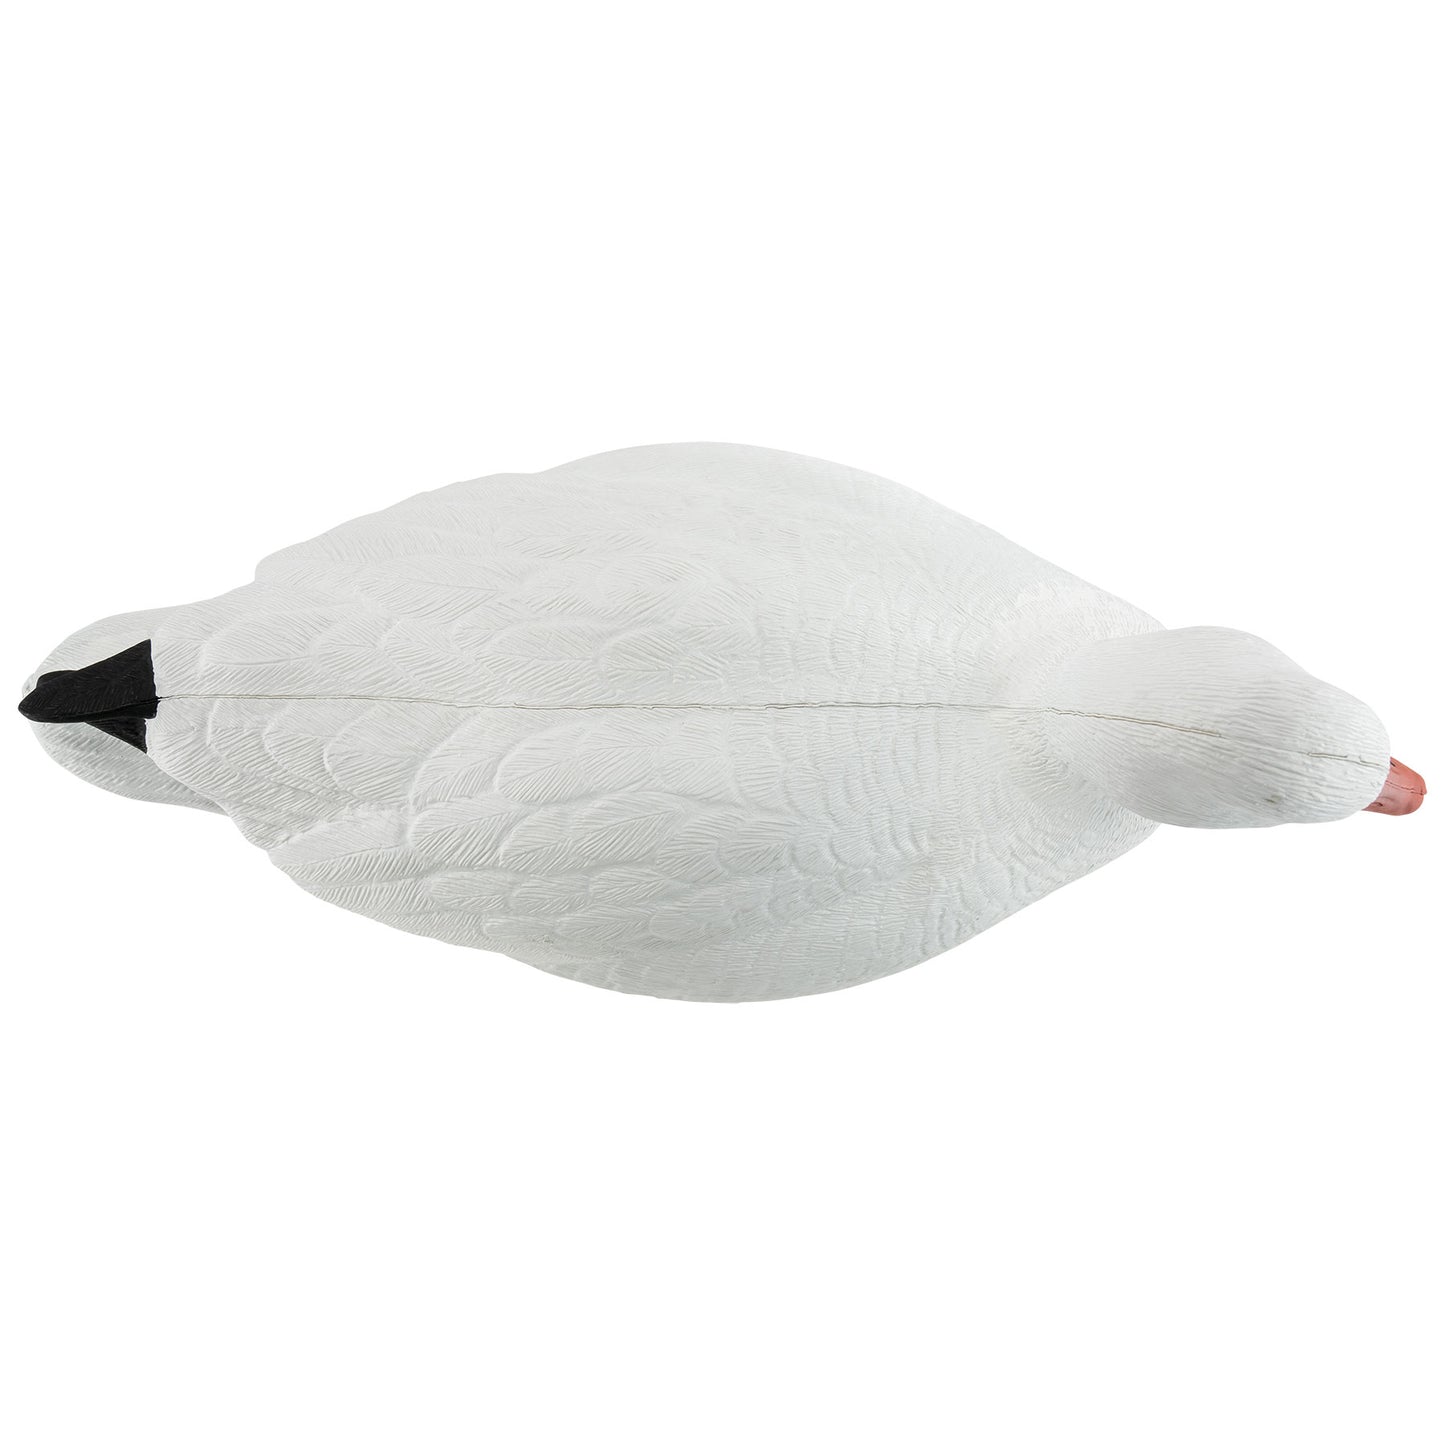 Snow Goose Floater